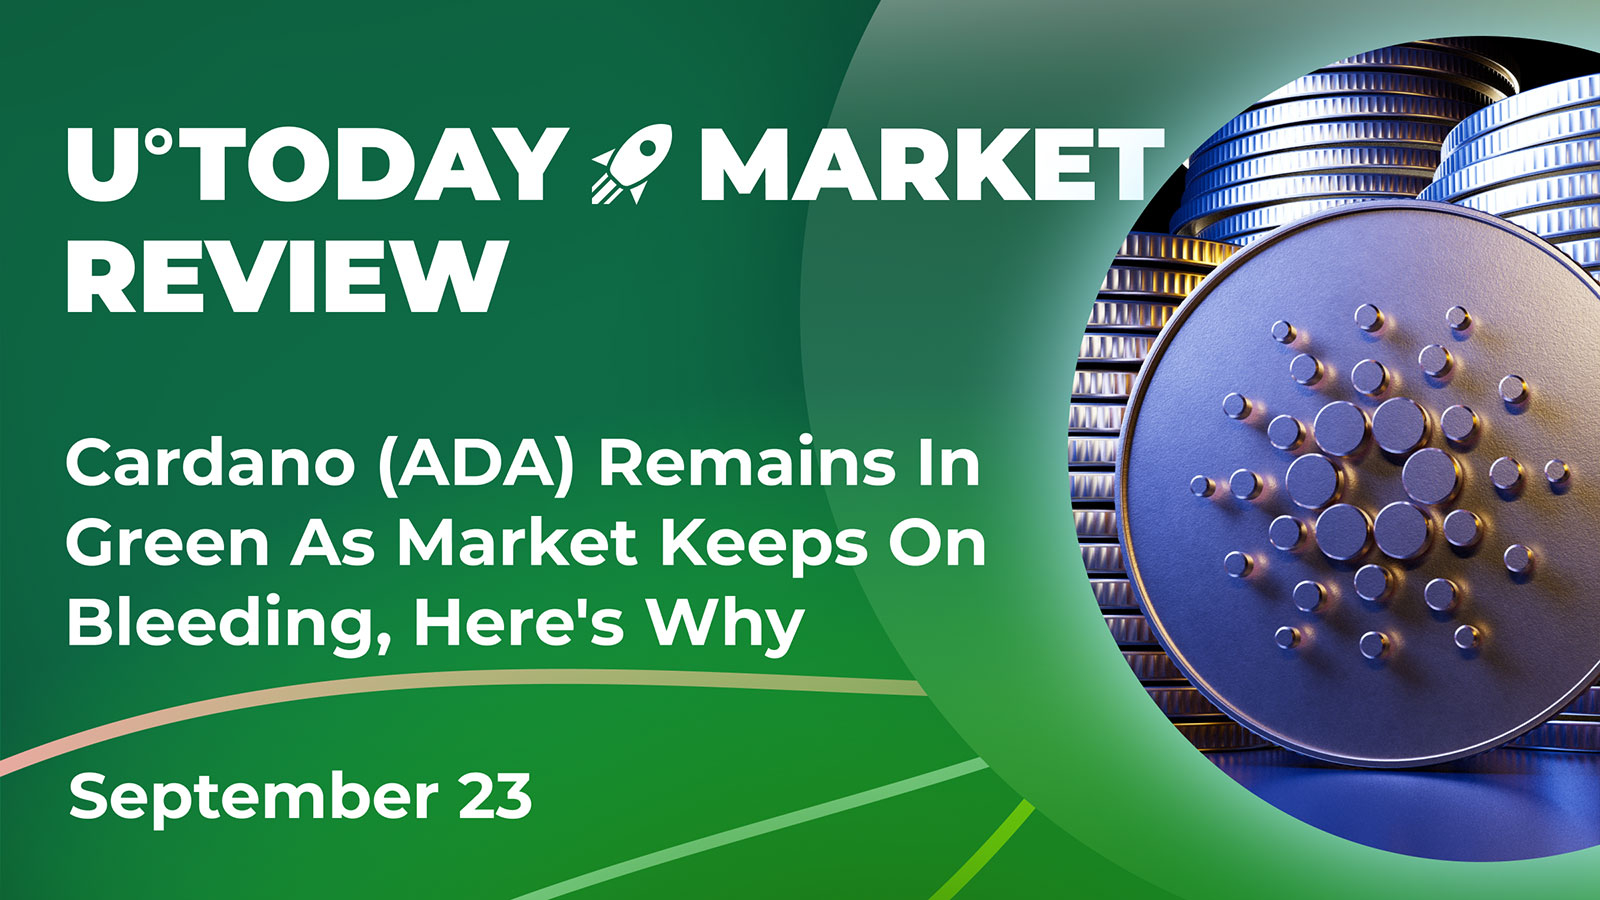 Cardano (ADA) Remains in Green as Market Keeps on Bleeding, Here’s Why: Crypto Market Review, September 23